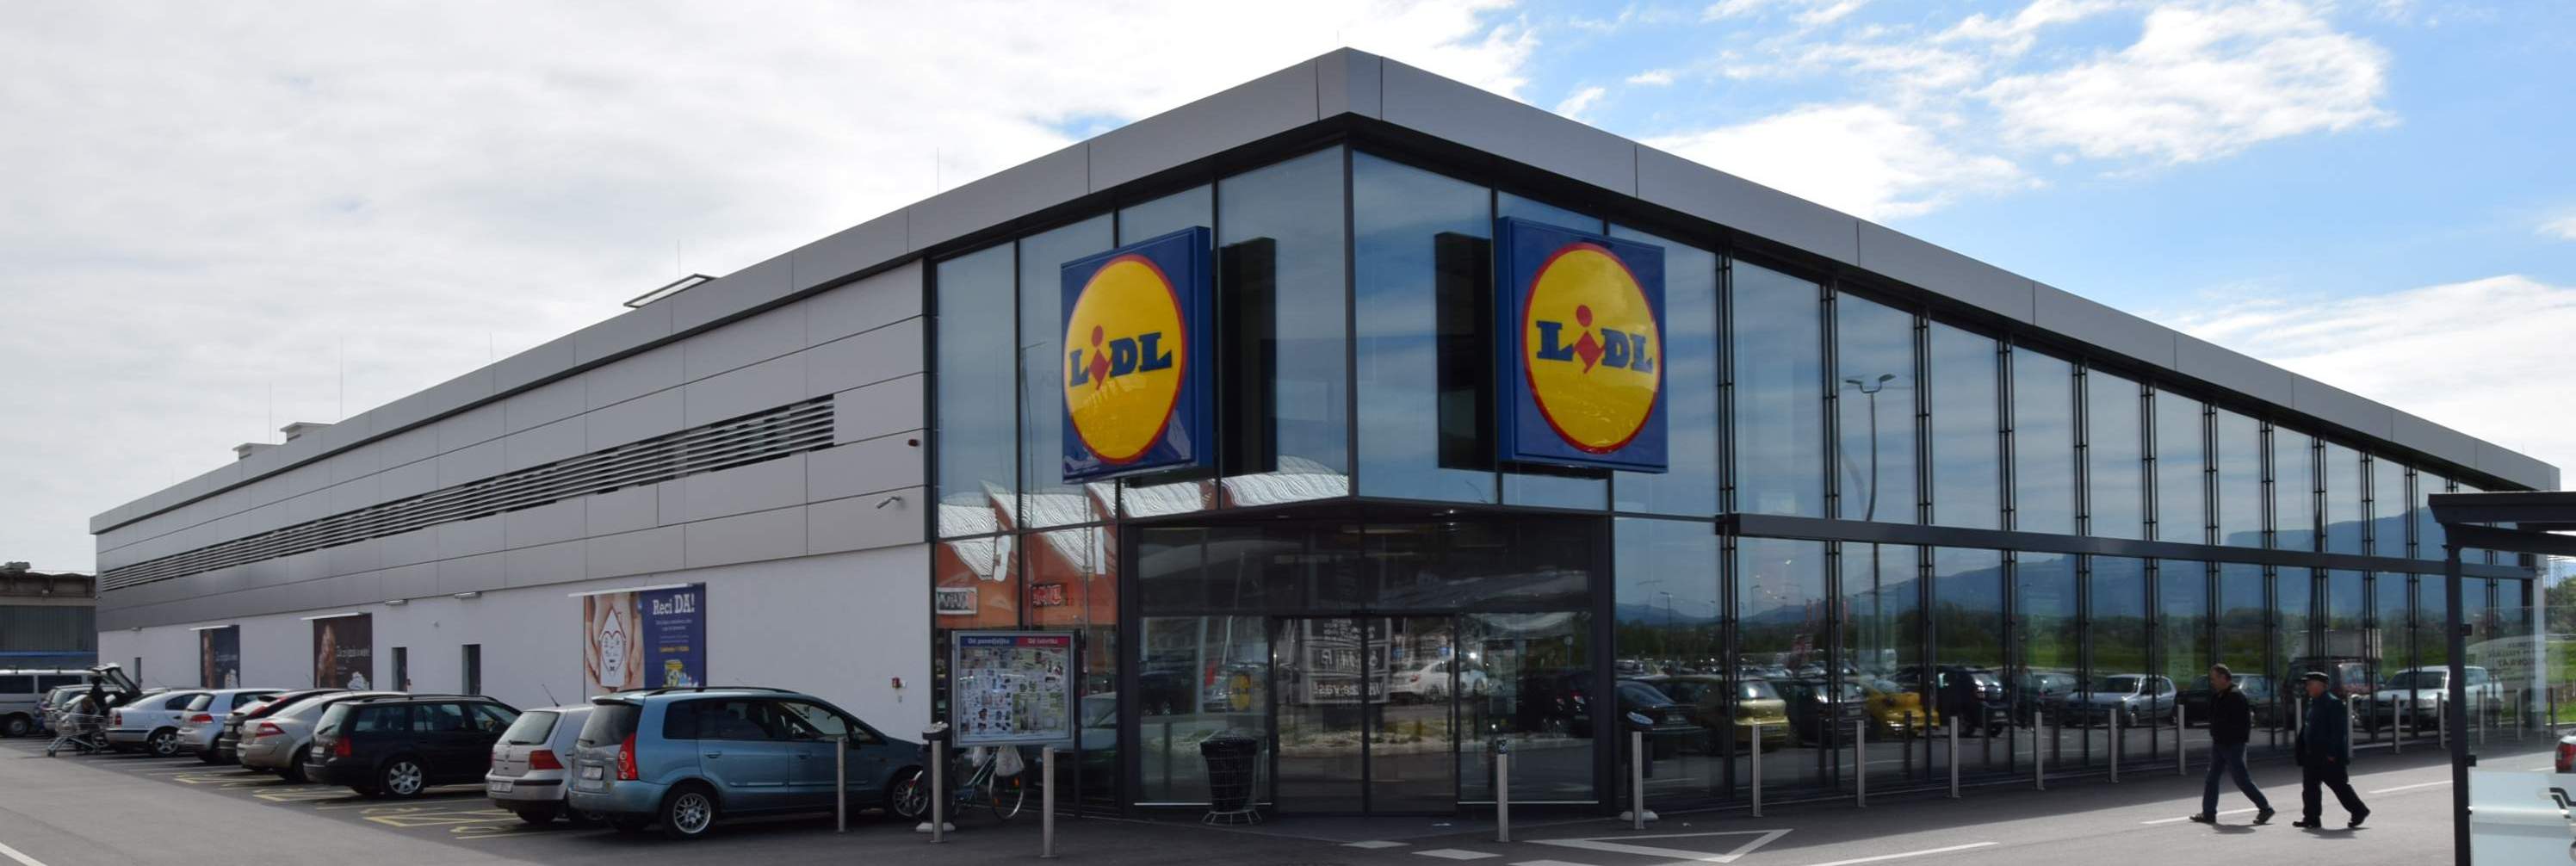 LIDL discount store